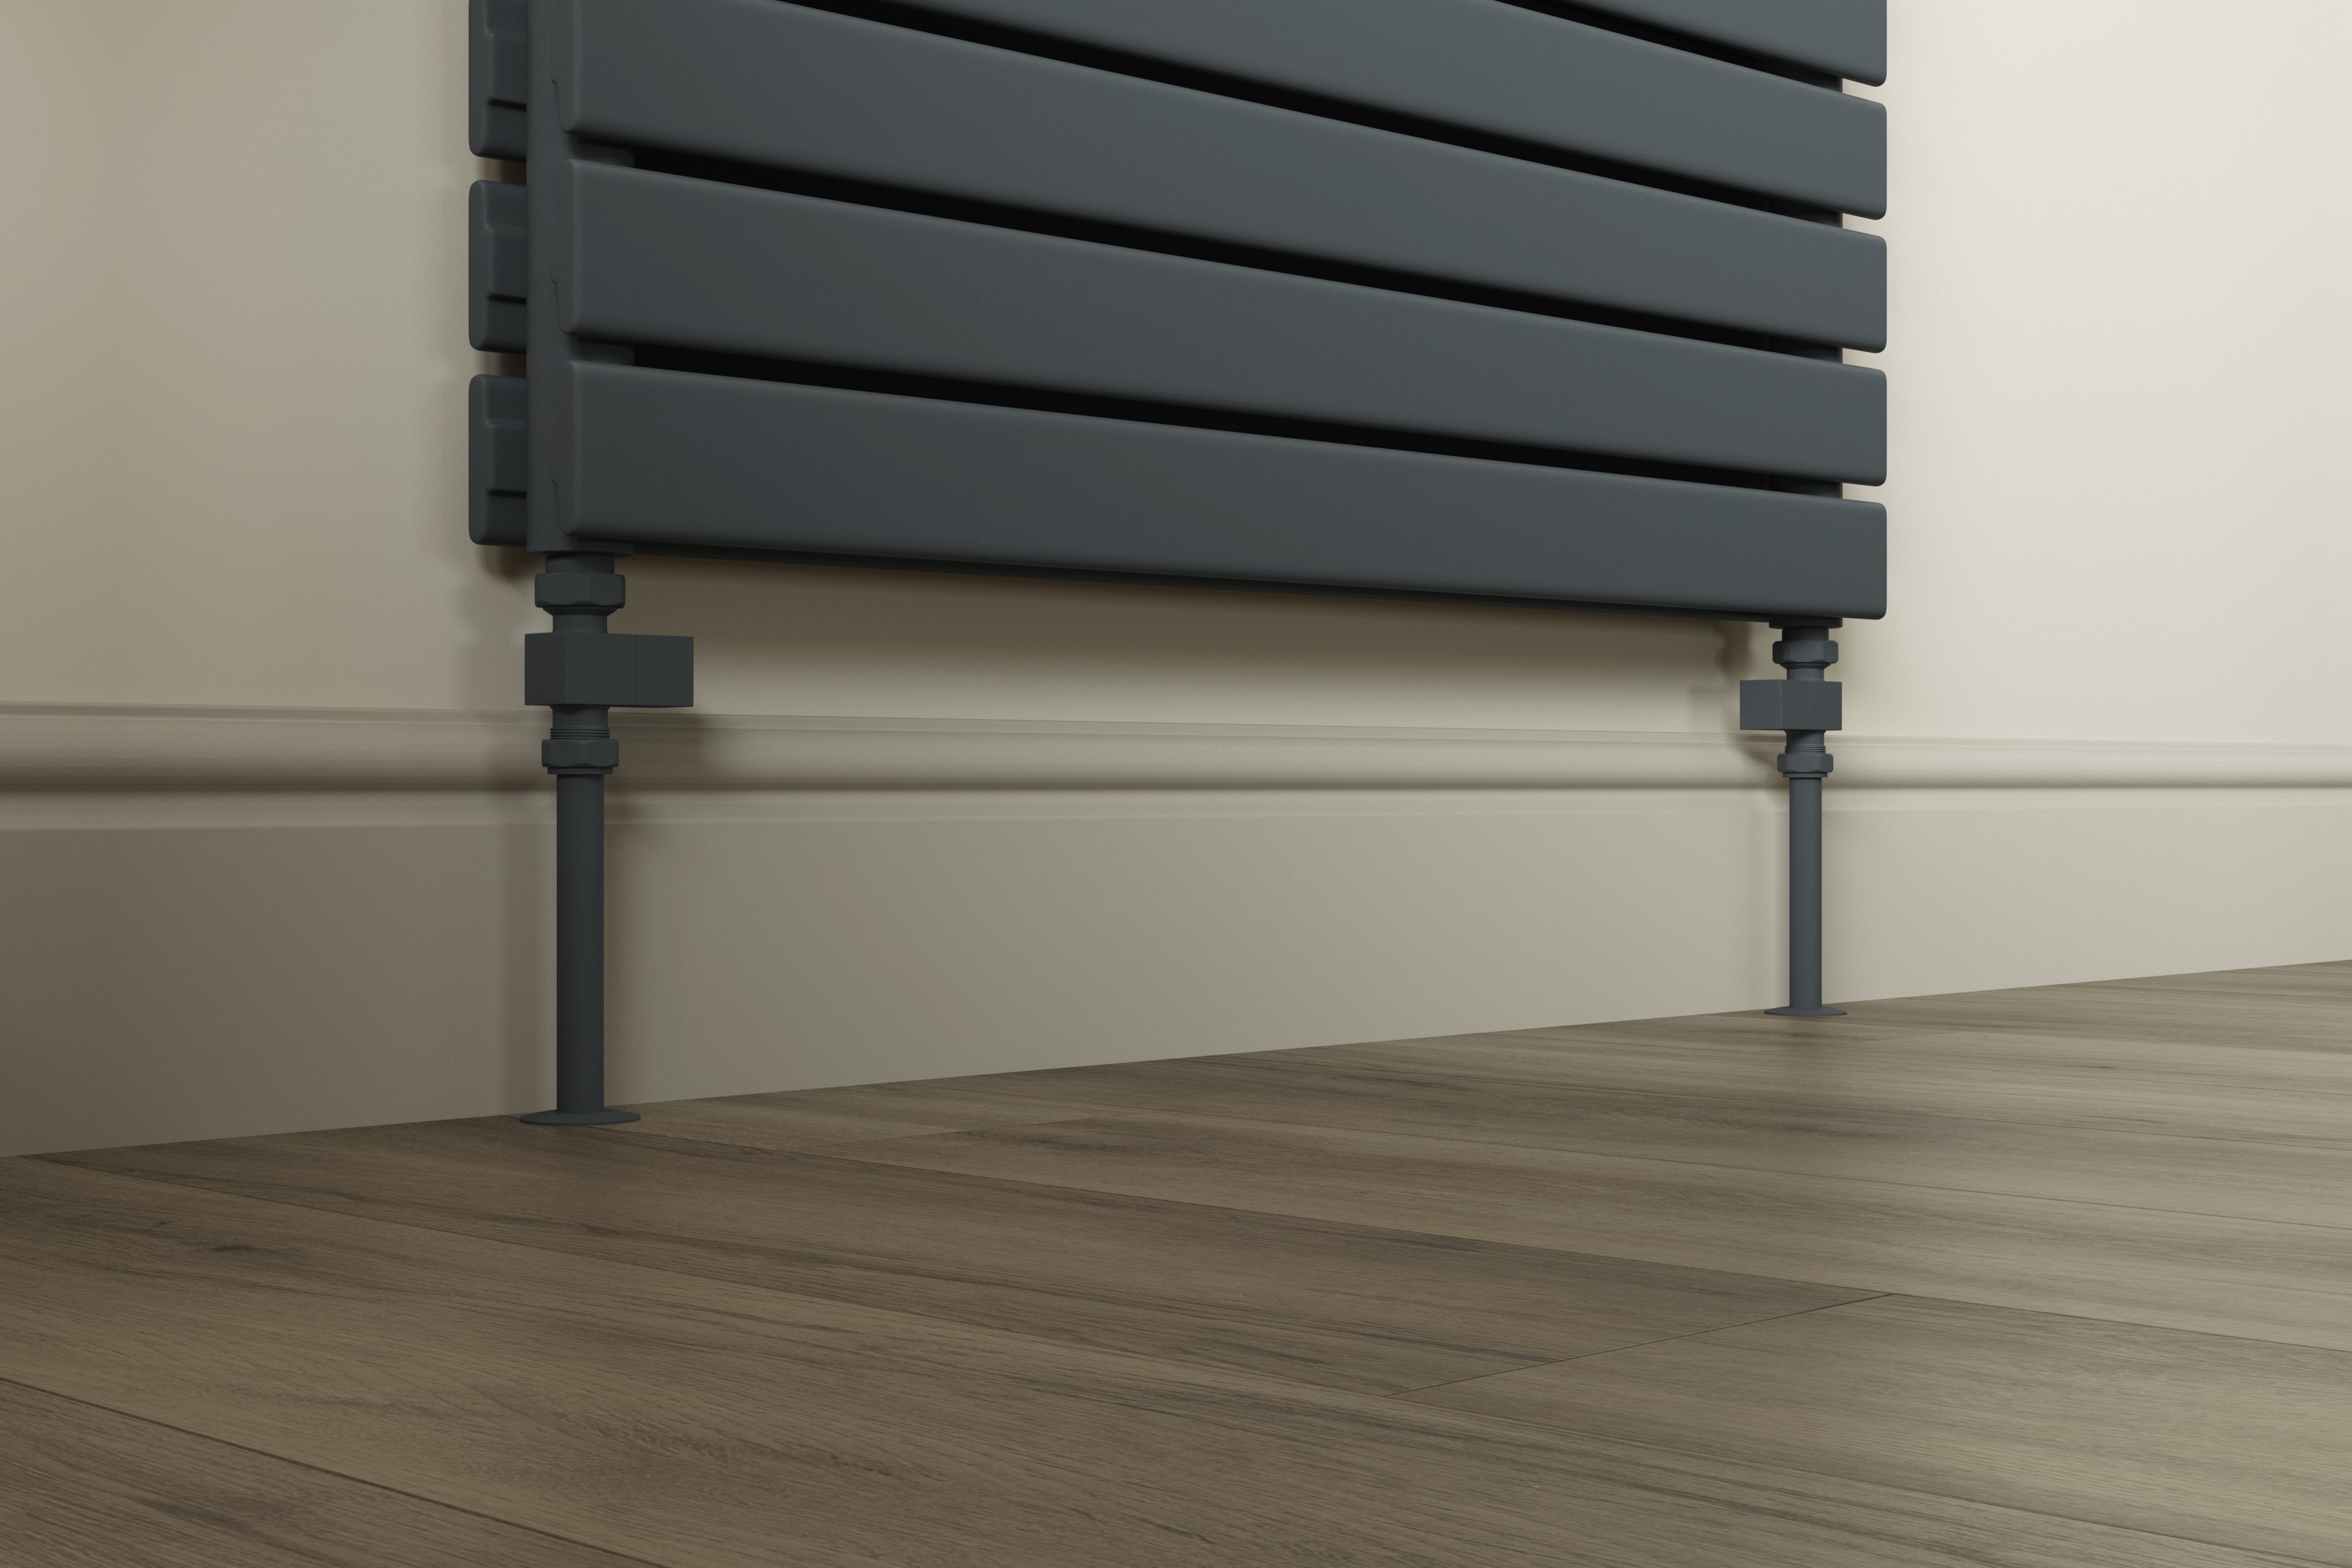 An anthracite grey flat panel radiator with perfectly matching pipe covers in a minimalist room.